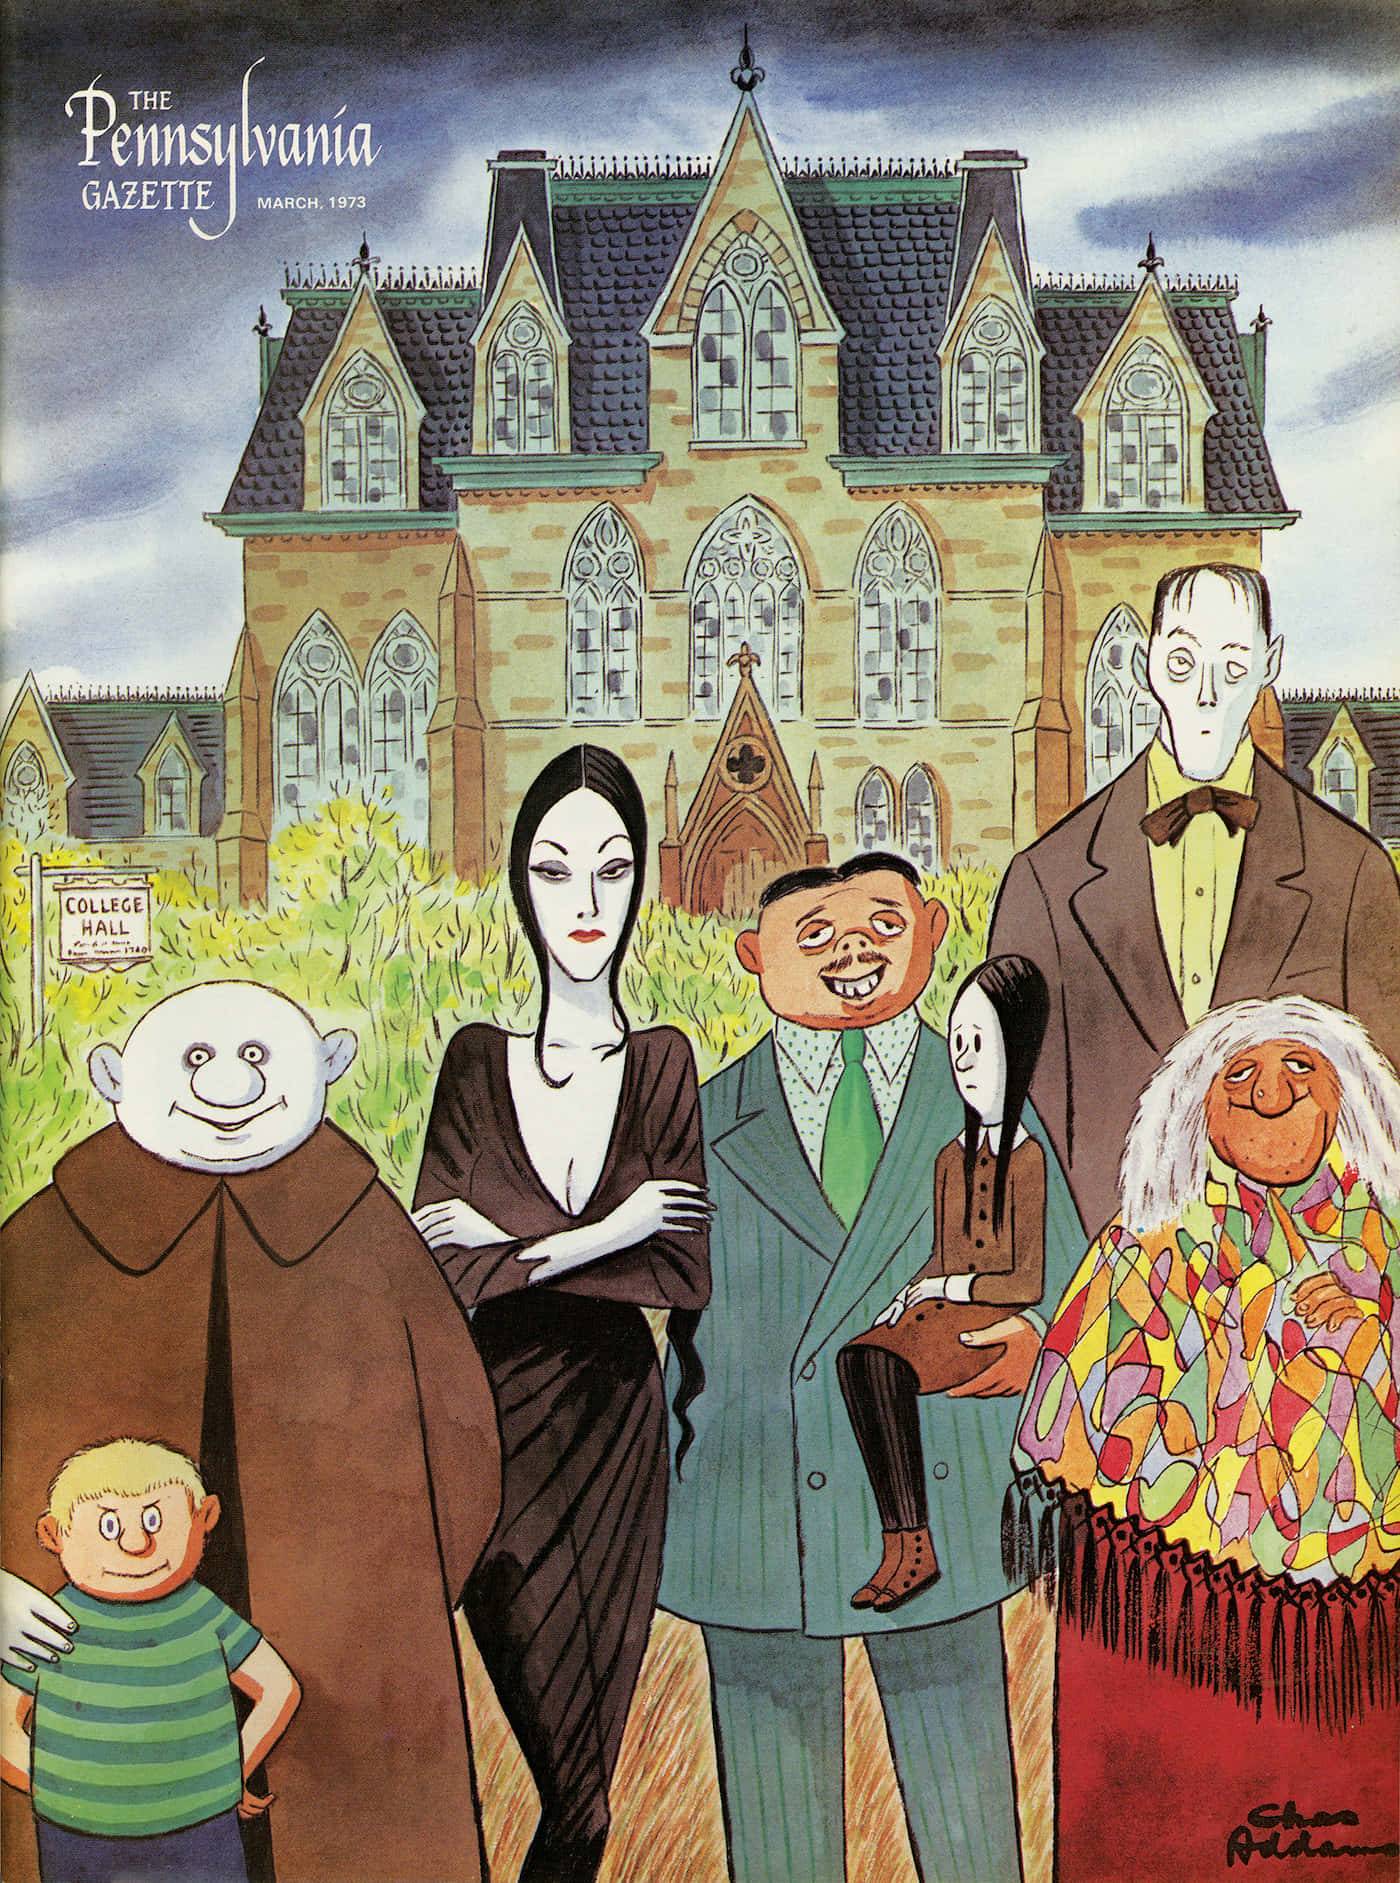 The Addams Family — A picture capturing the spooky, humorous family at its best.